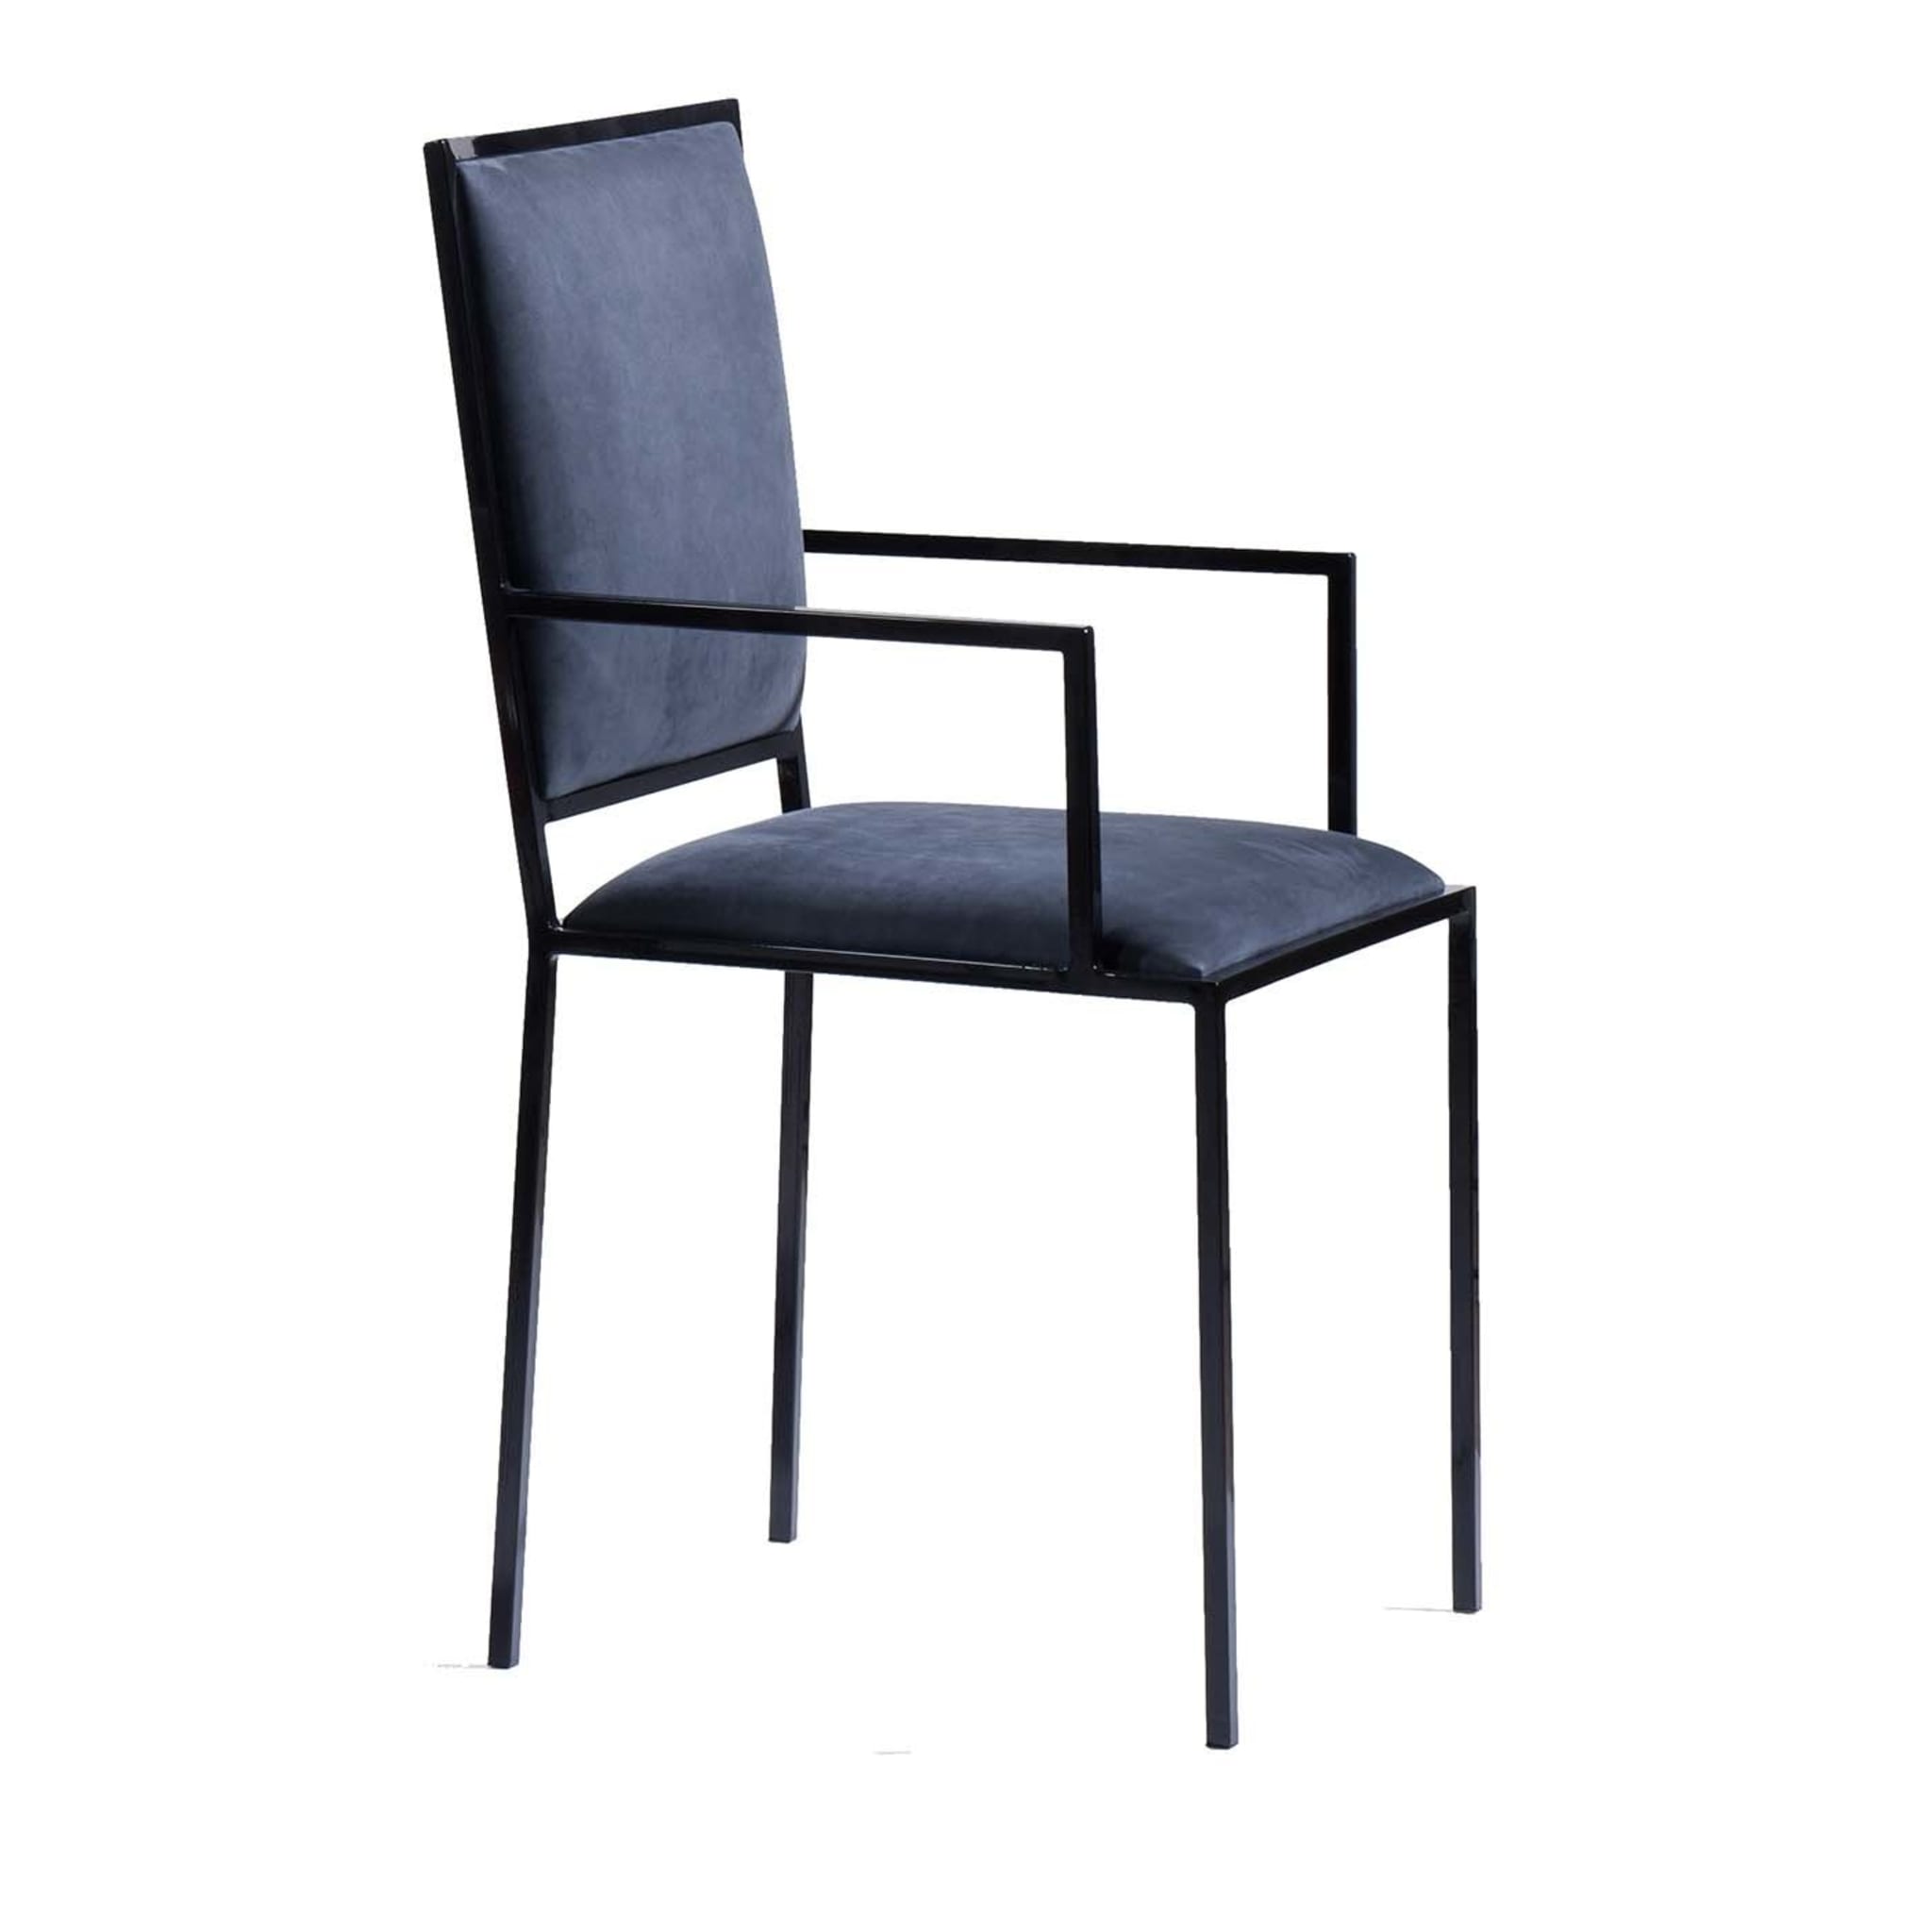 The Simple Chair with Armrests in Royal Blue - Main view